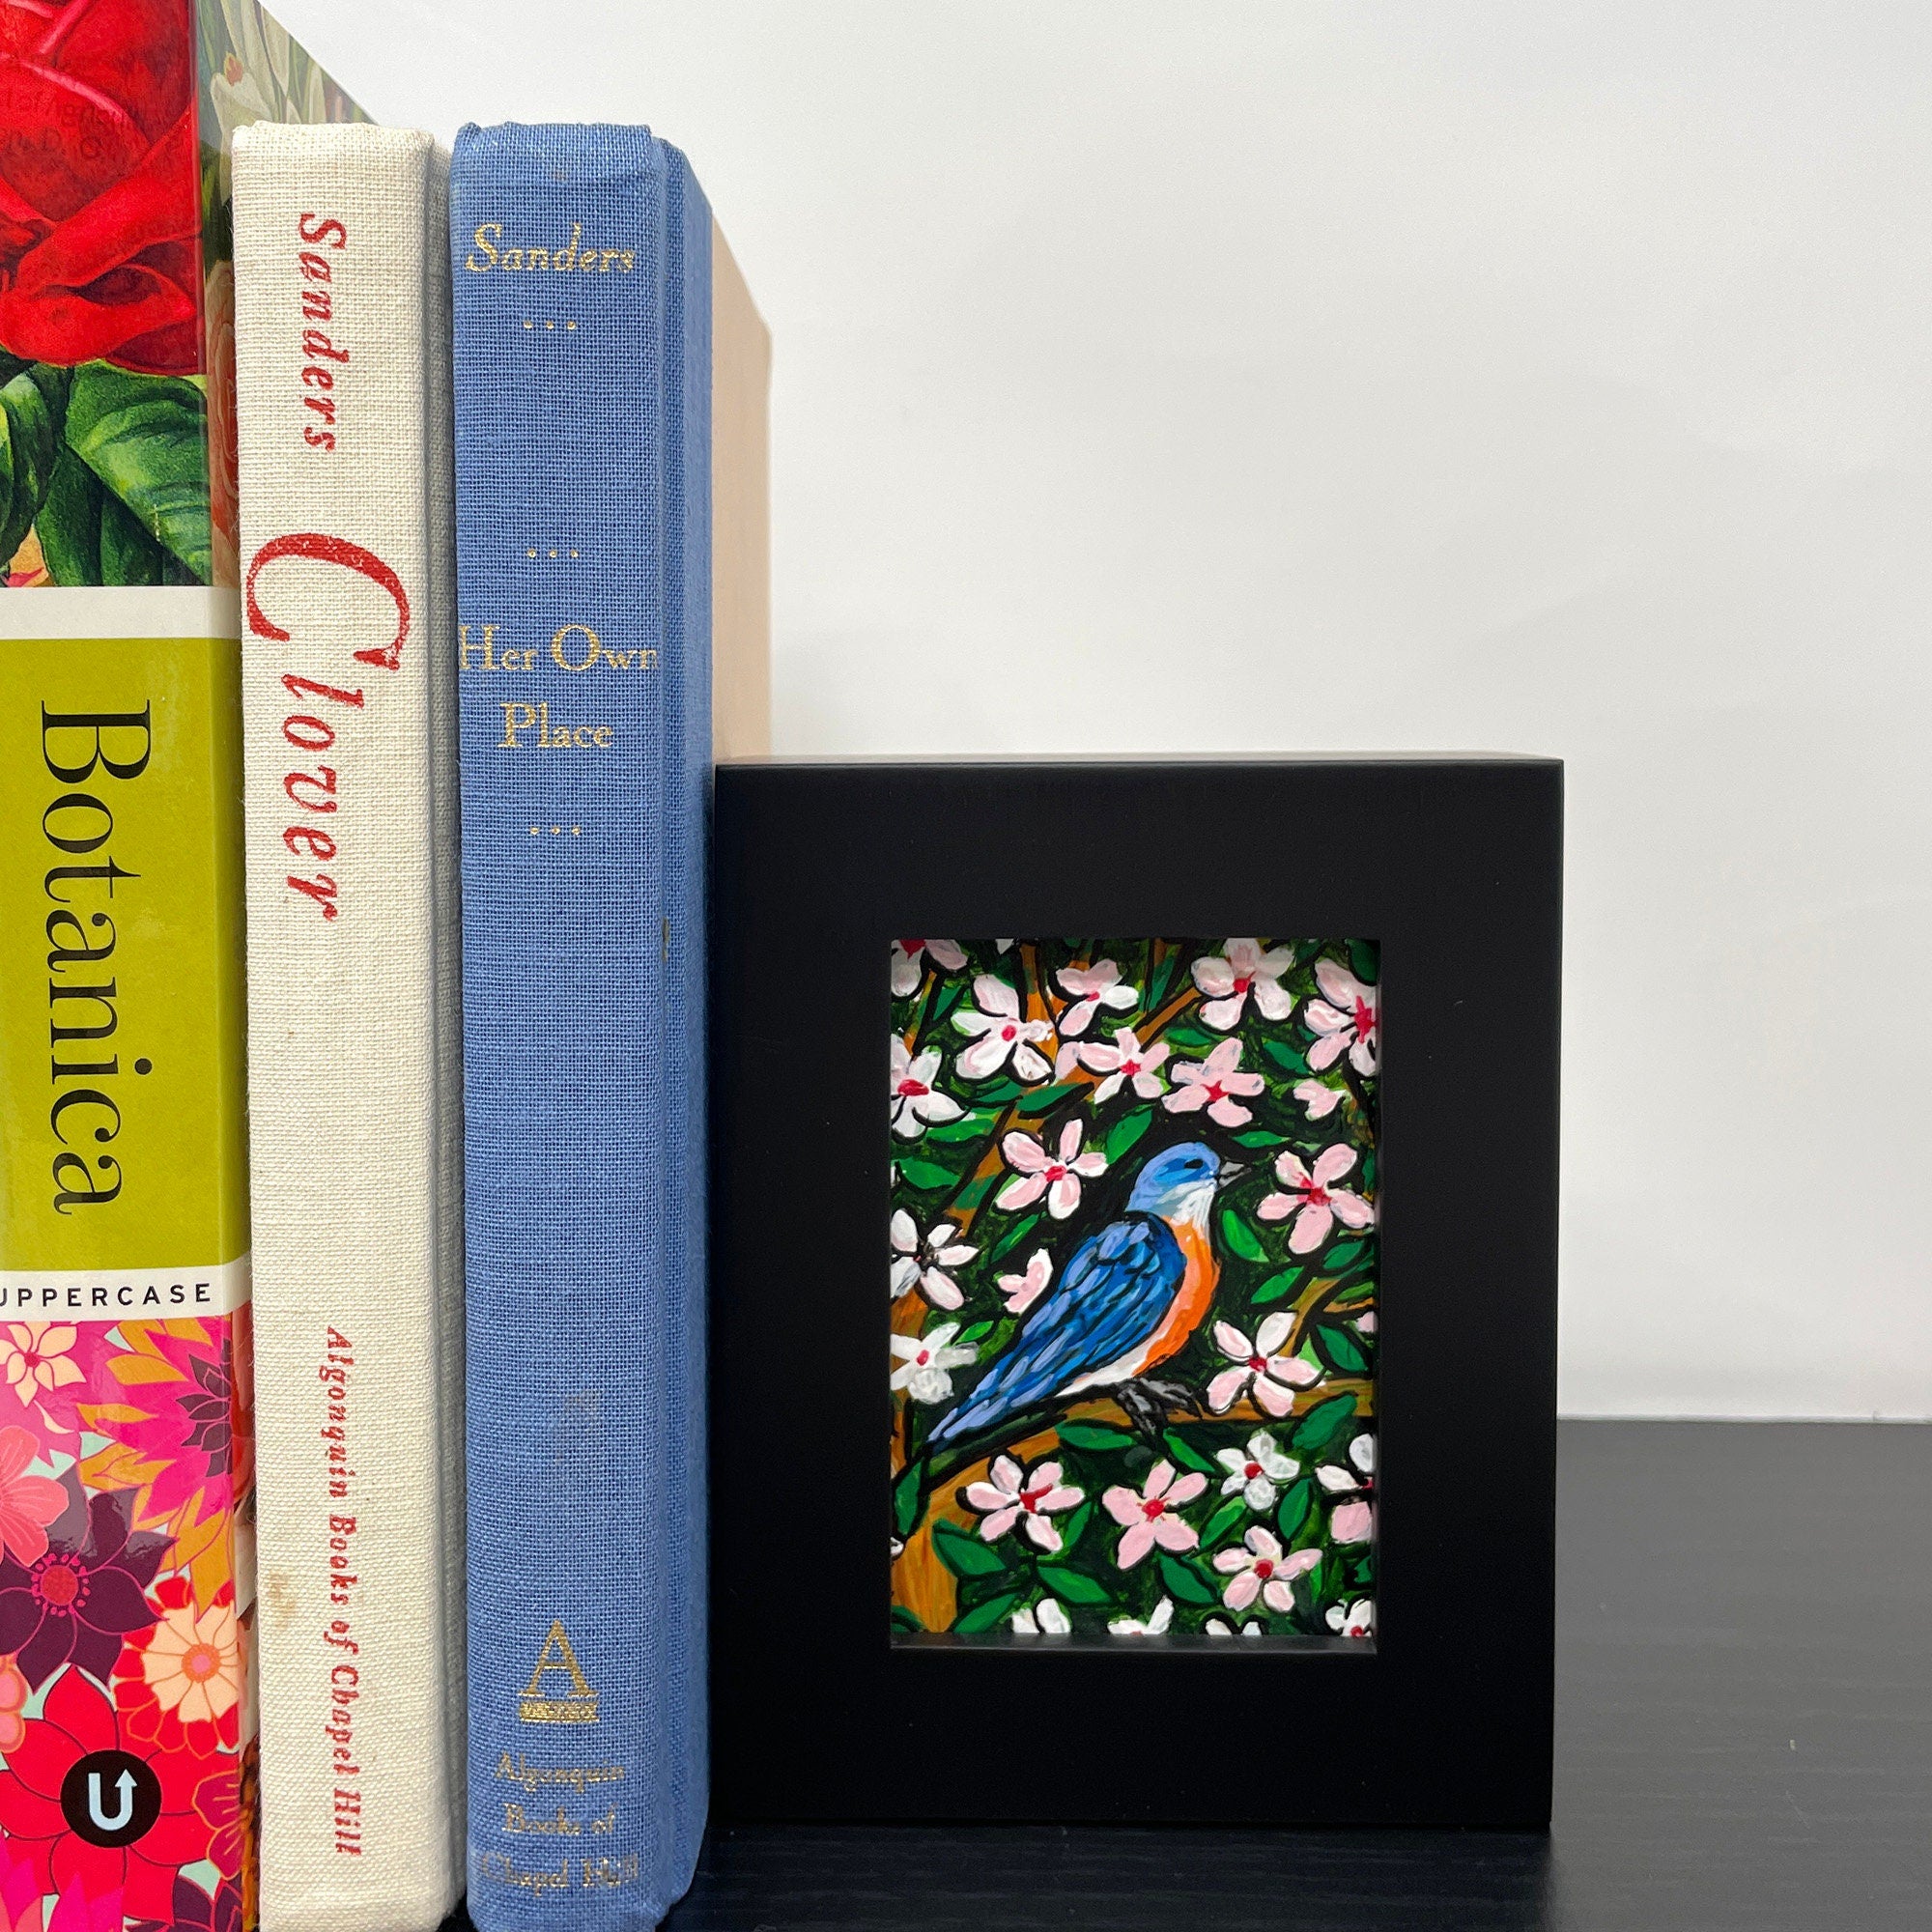 Framed bluebird painting sitting on a black shelf with books. In the painting a bluebird sits on a cherry tree surrounded by pink and white cherry blossoms and green leaves.